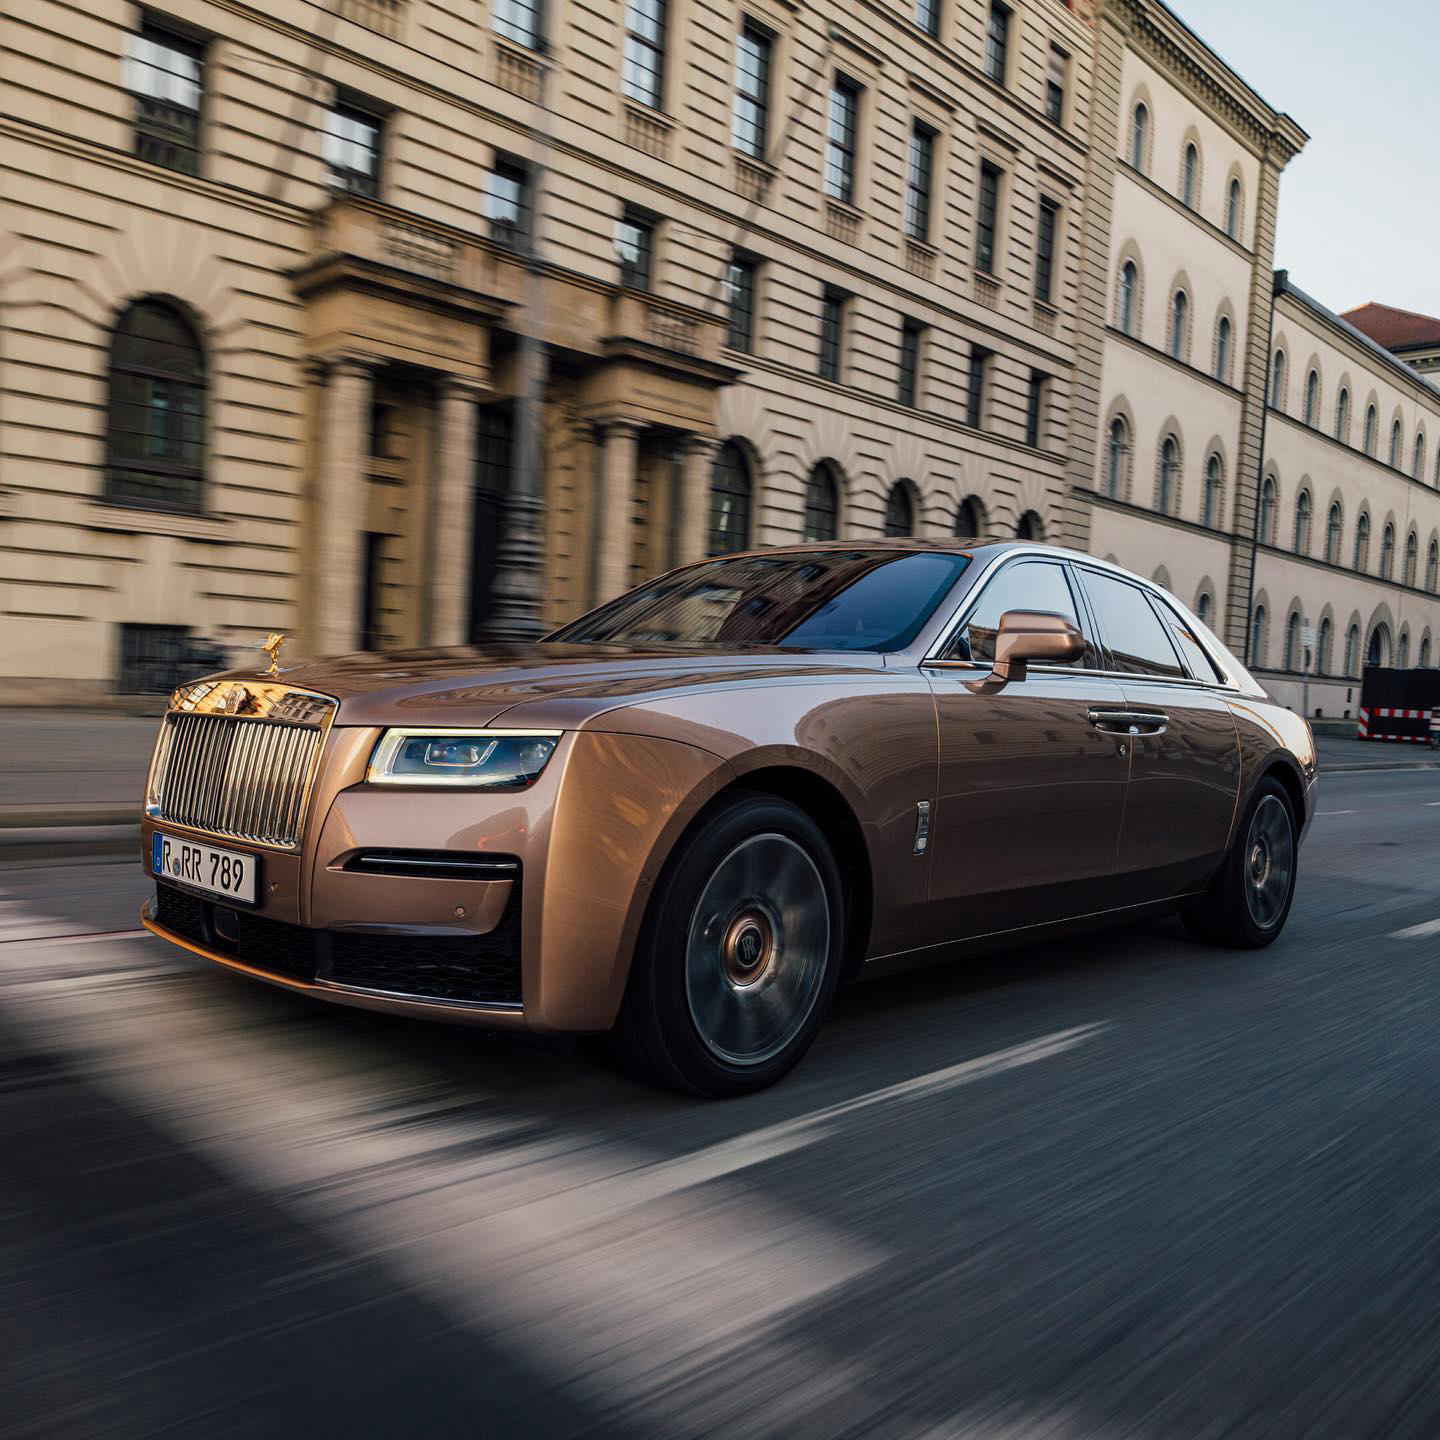 Rolls-Royce Motor Cars - Driving with effortless grace, this #Bespoke Ghost in Petra Gold exudes ele